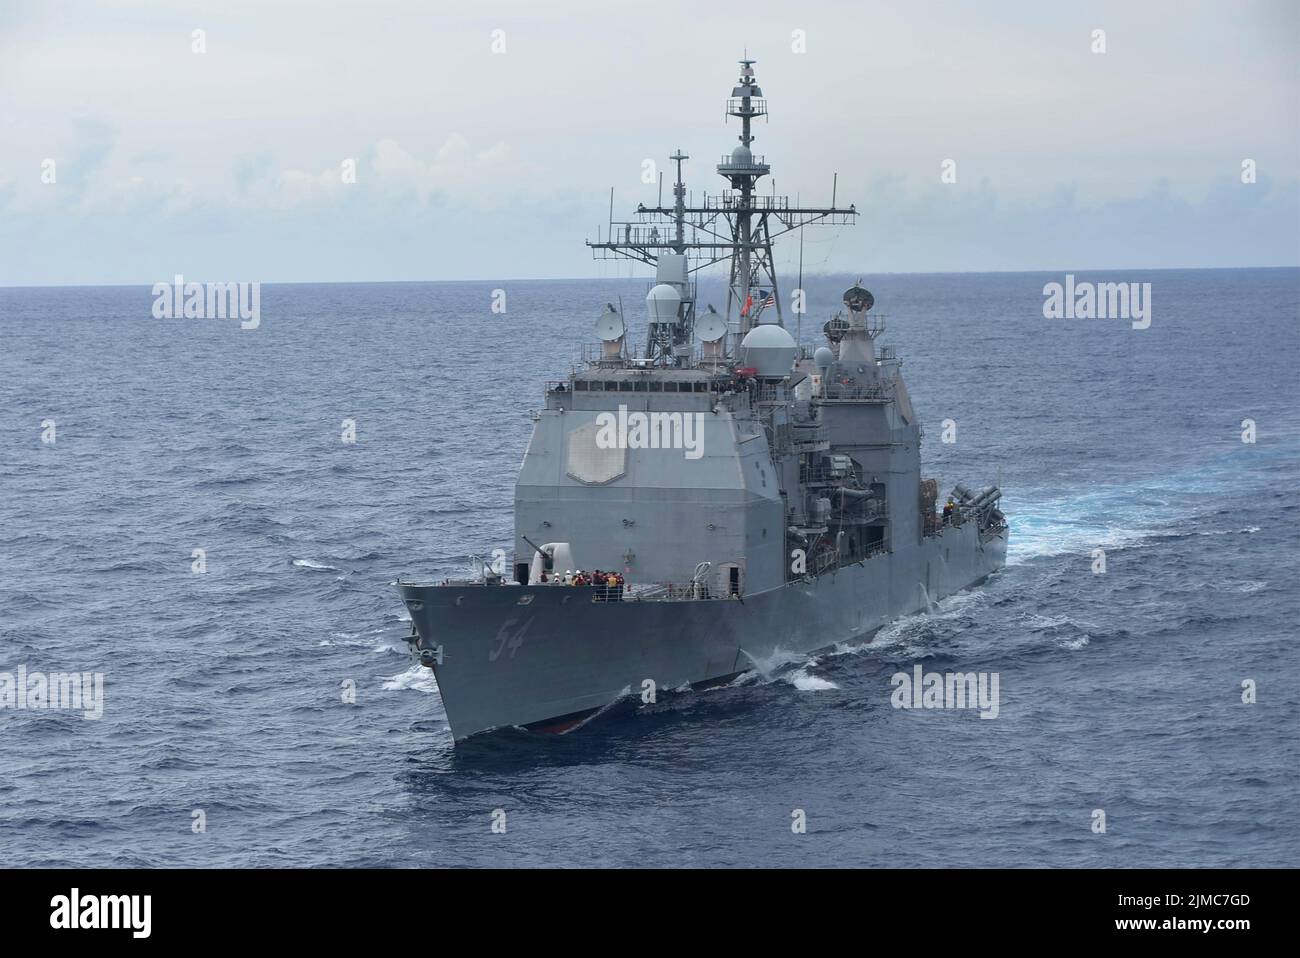 Philippine Sea, United States. 02 August, 2022. The U.S. Navy Ticonderoga-class guided-missile cruiser USS Antietam during routine operations, August 2, 2022 in the Philippine Sea.  Credit: MCS Christopher Bosch/Planetpix/Alamy Live News Stock Photo